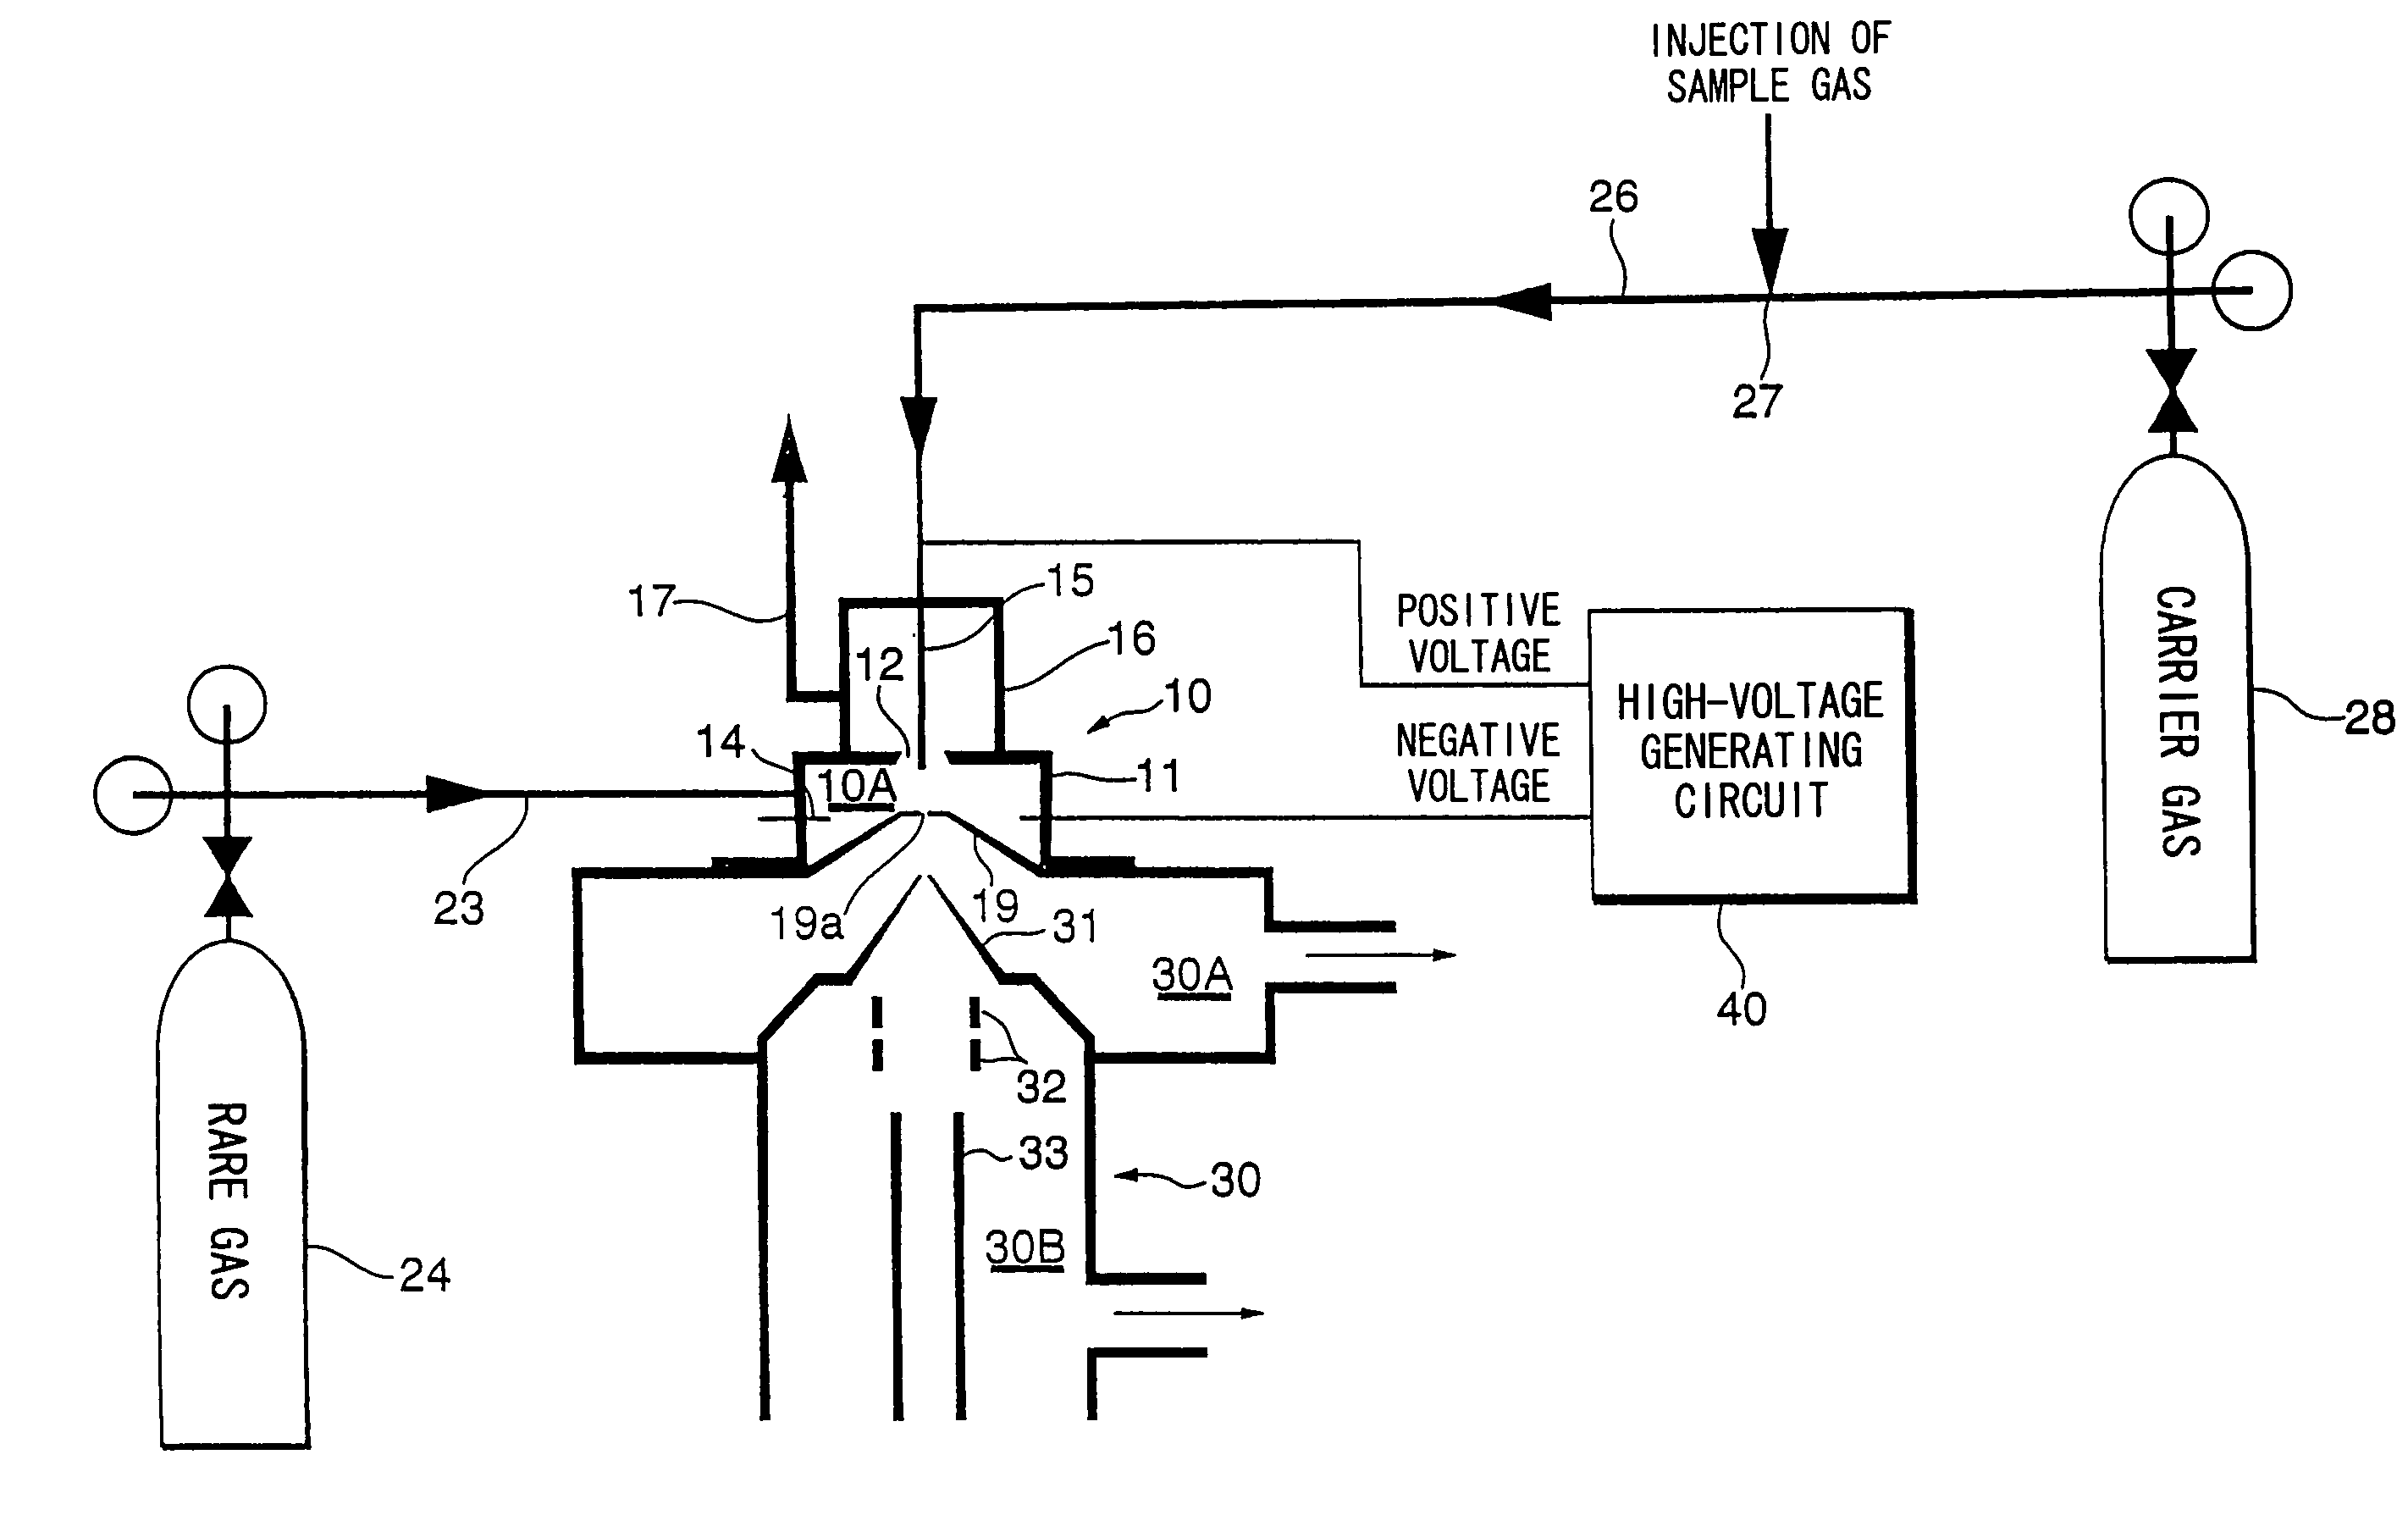 Method of and apparatus for ionizing sample gas